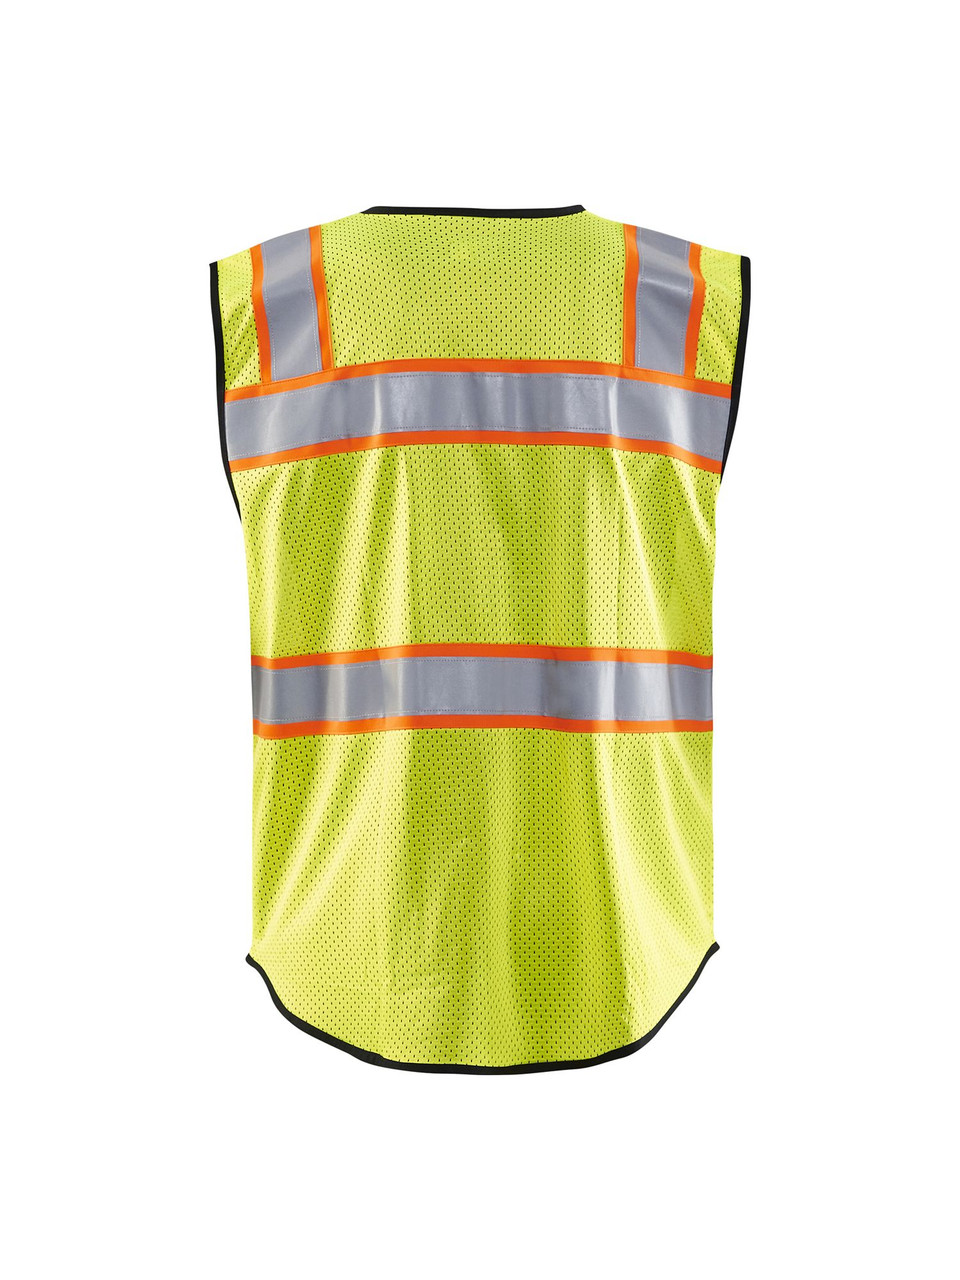 Blaklader Yellow/Black Size 5XL Hivis Vest for Carpentry Construction